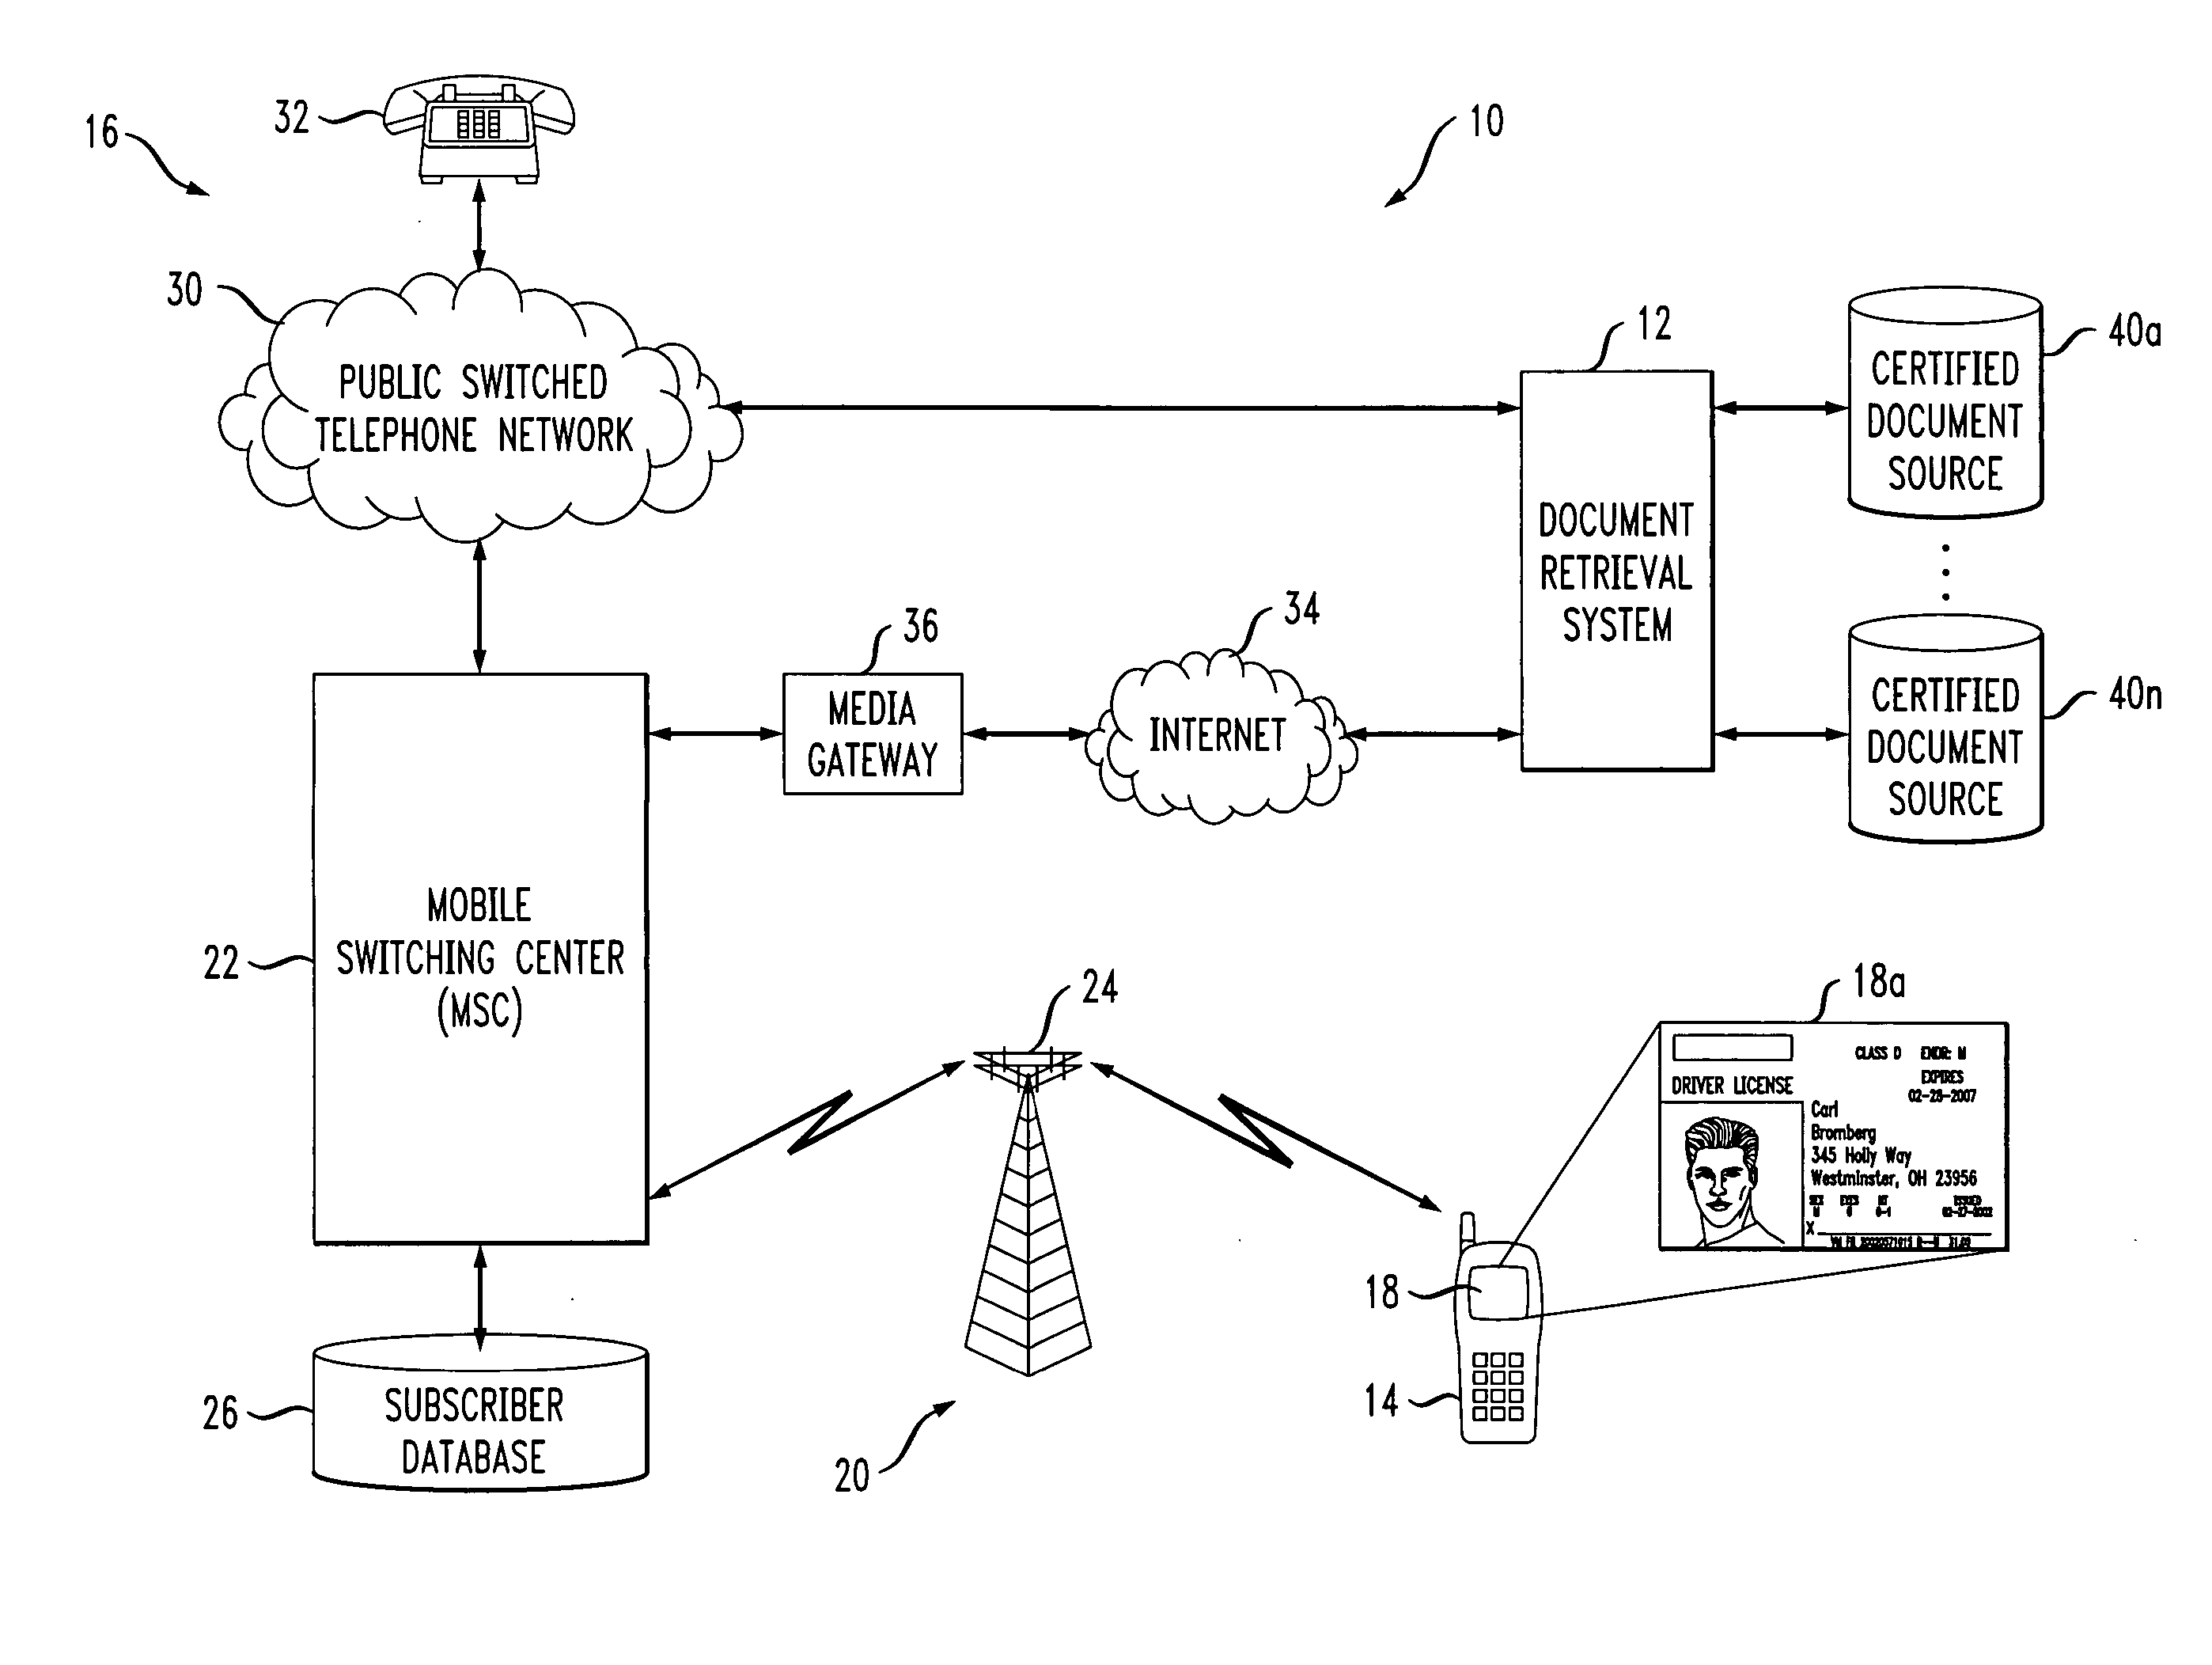 System and method of providing certified document retrieval